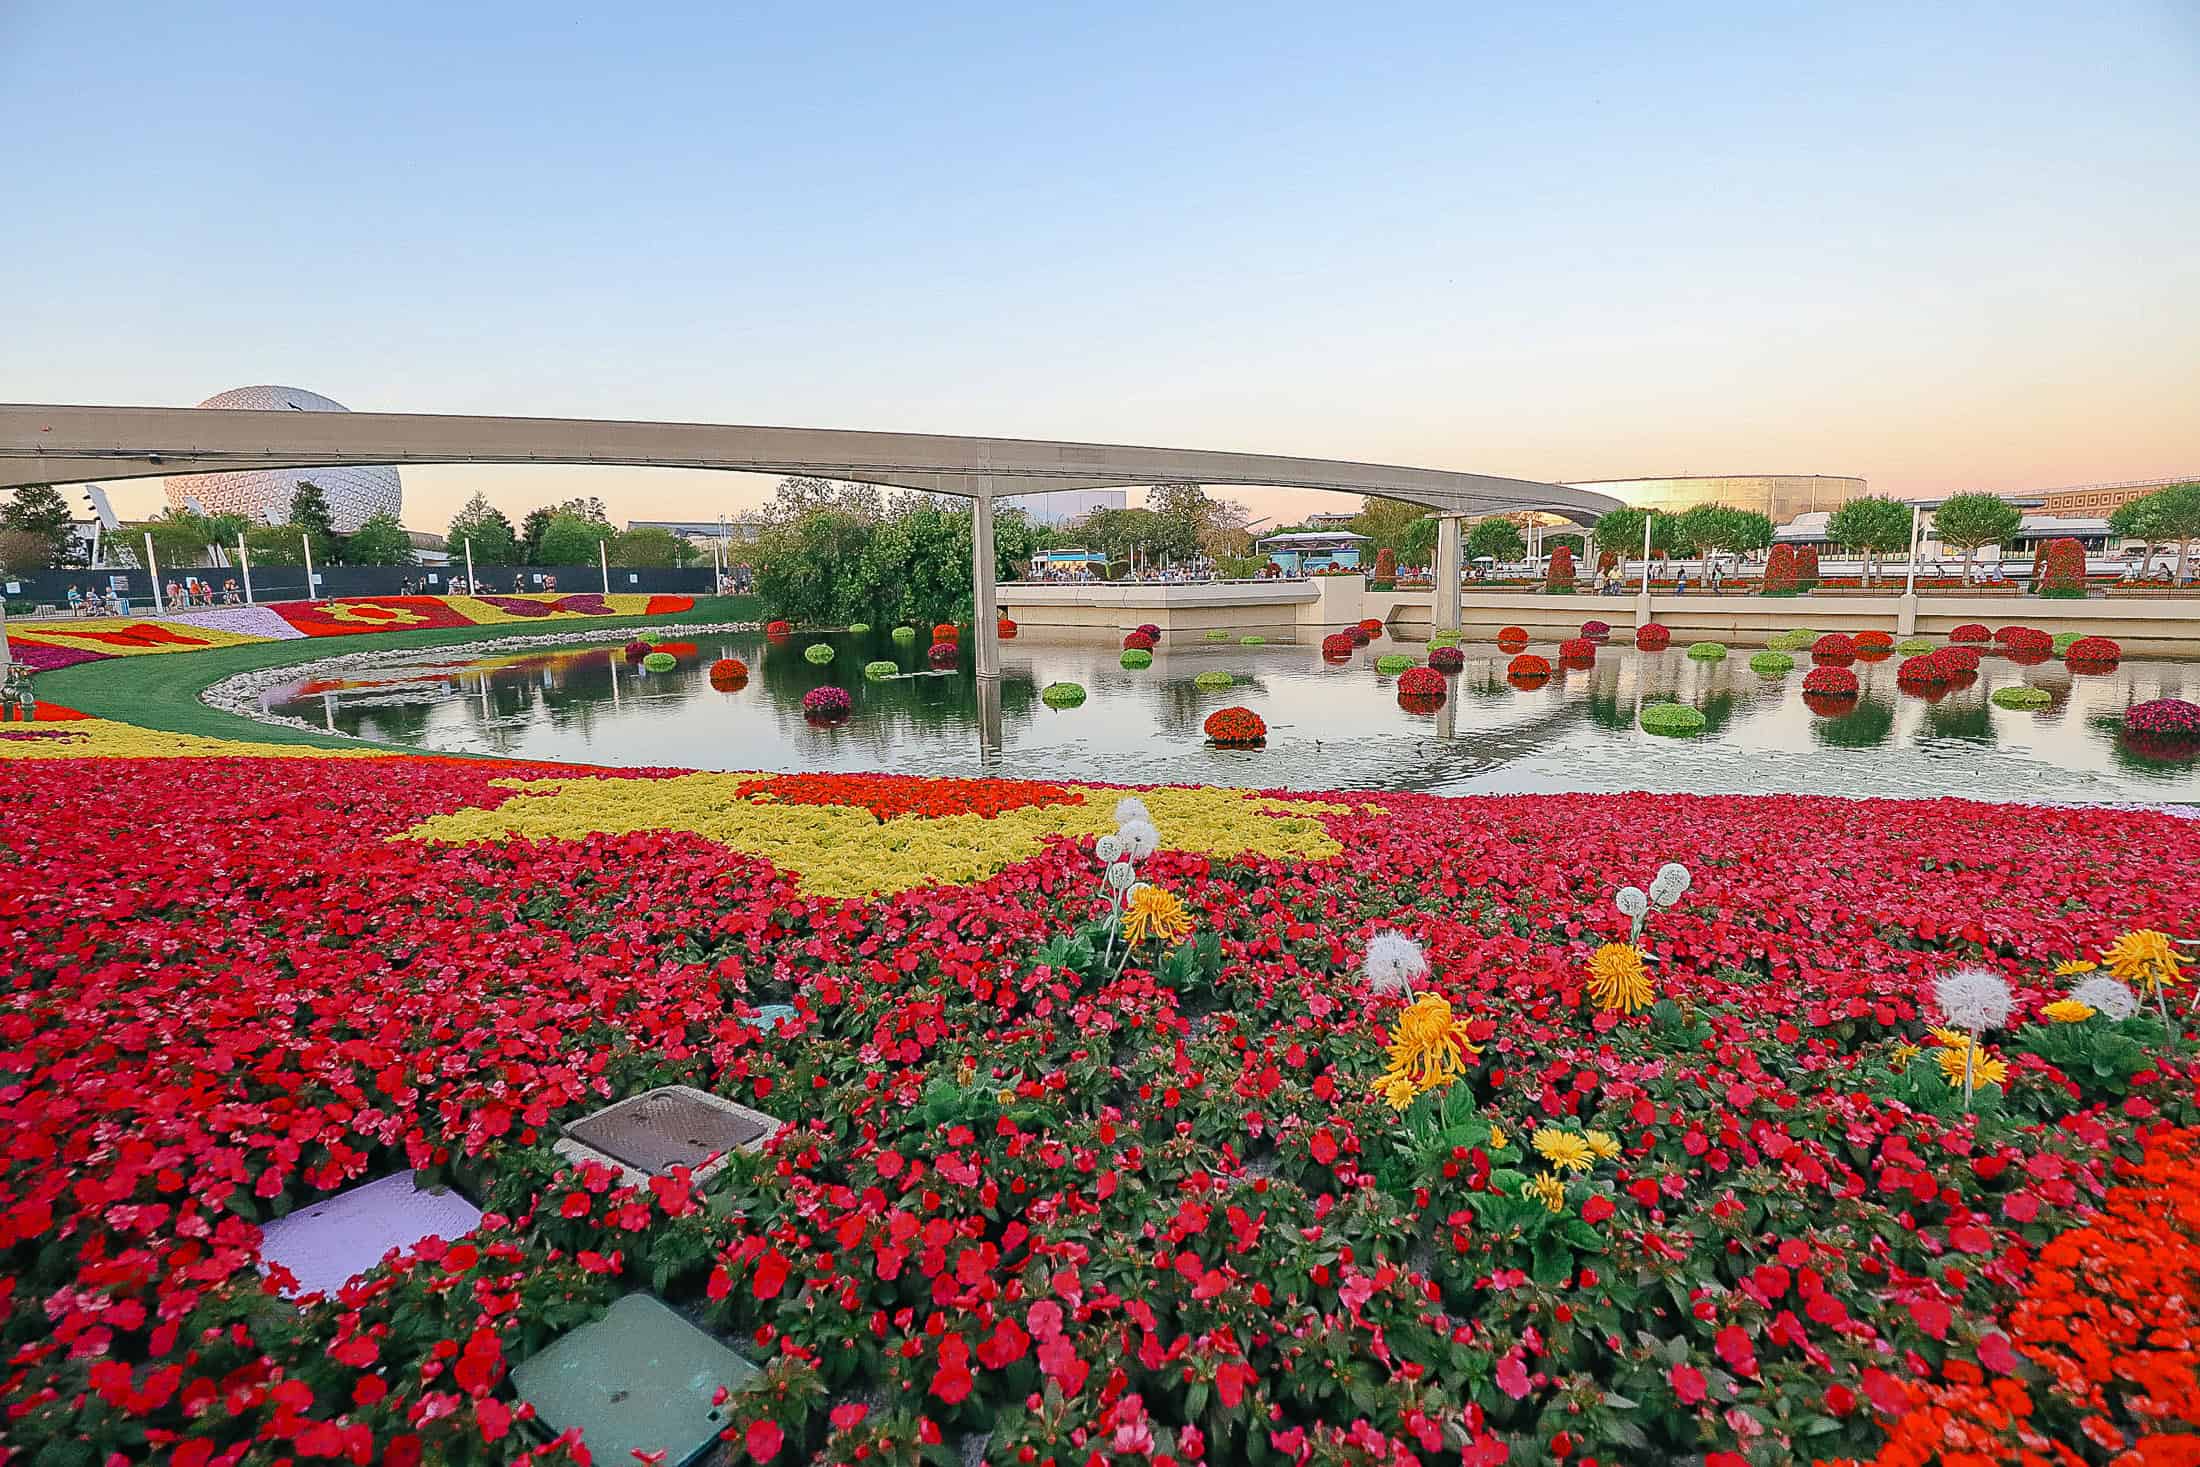 flowers in bloom at Epcot's International Flower and Garden Festival 